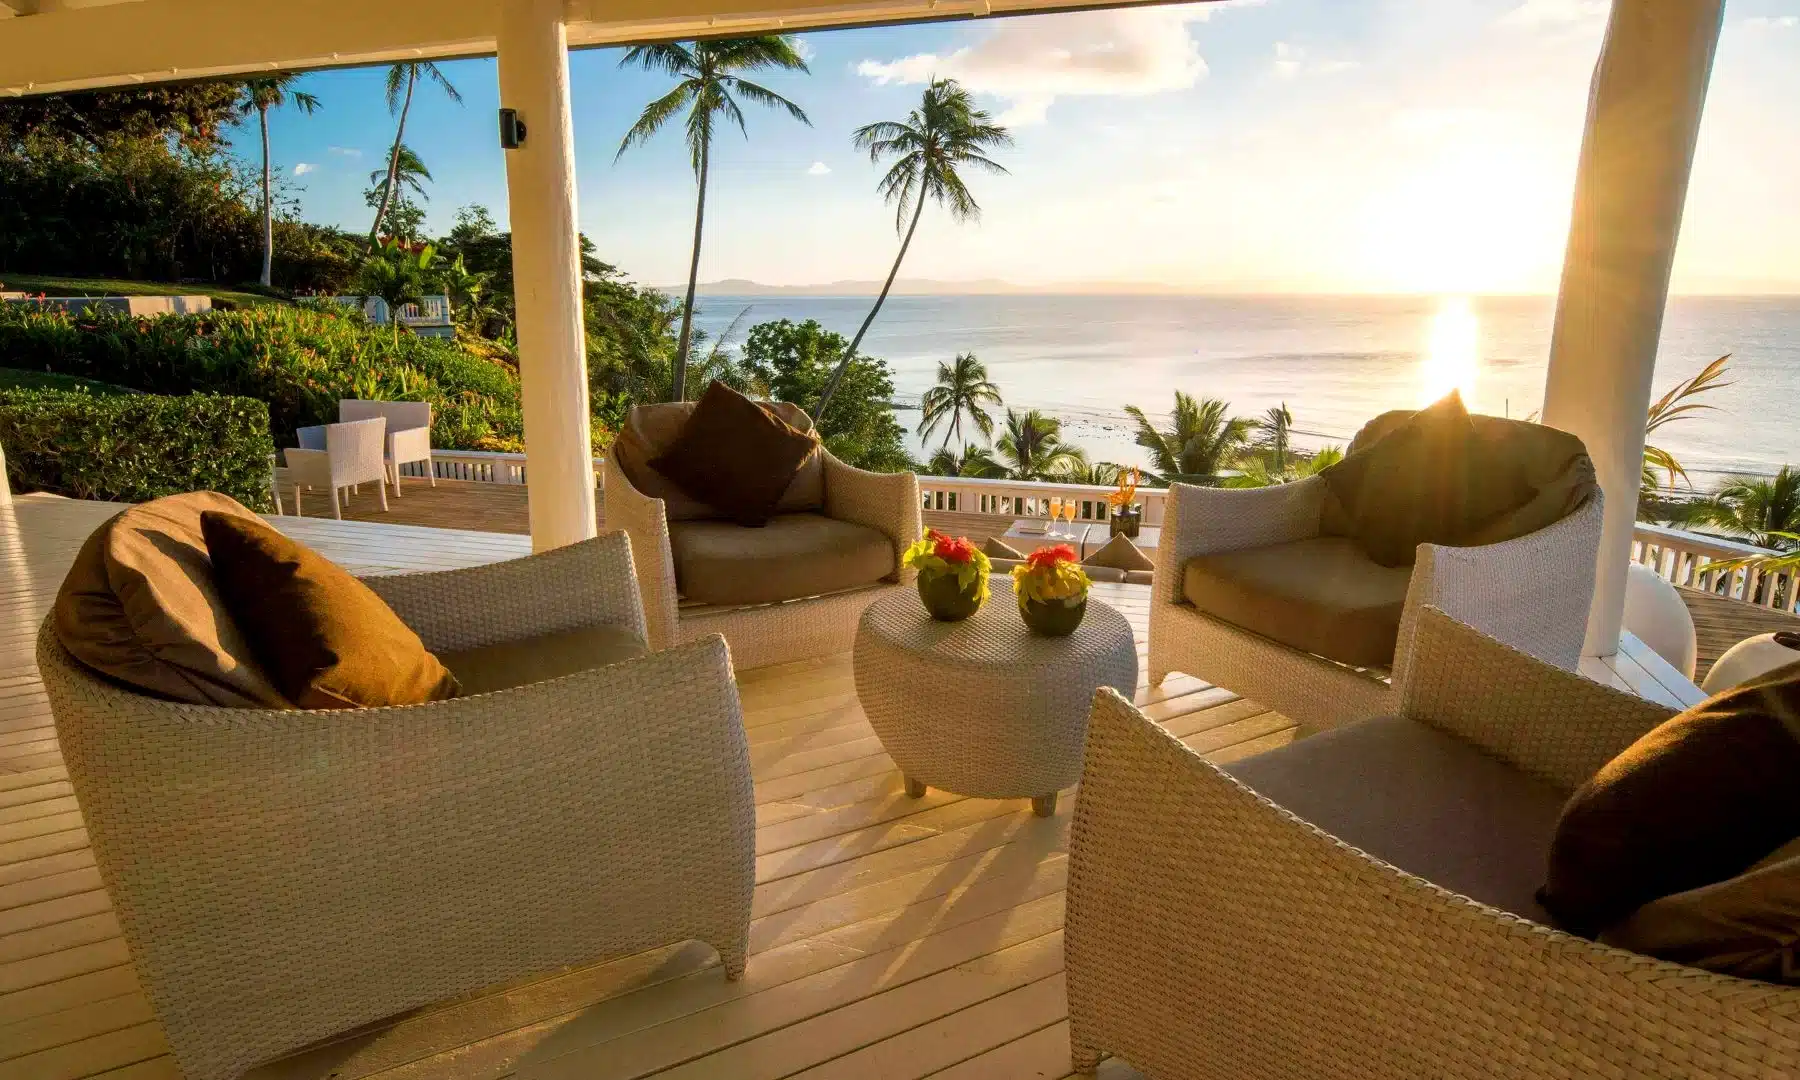 Luxury private resort Fiji, fundraiser auction items, live auction items